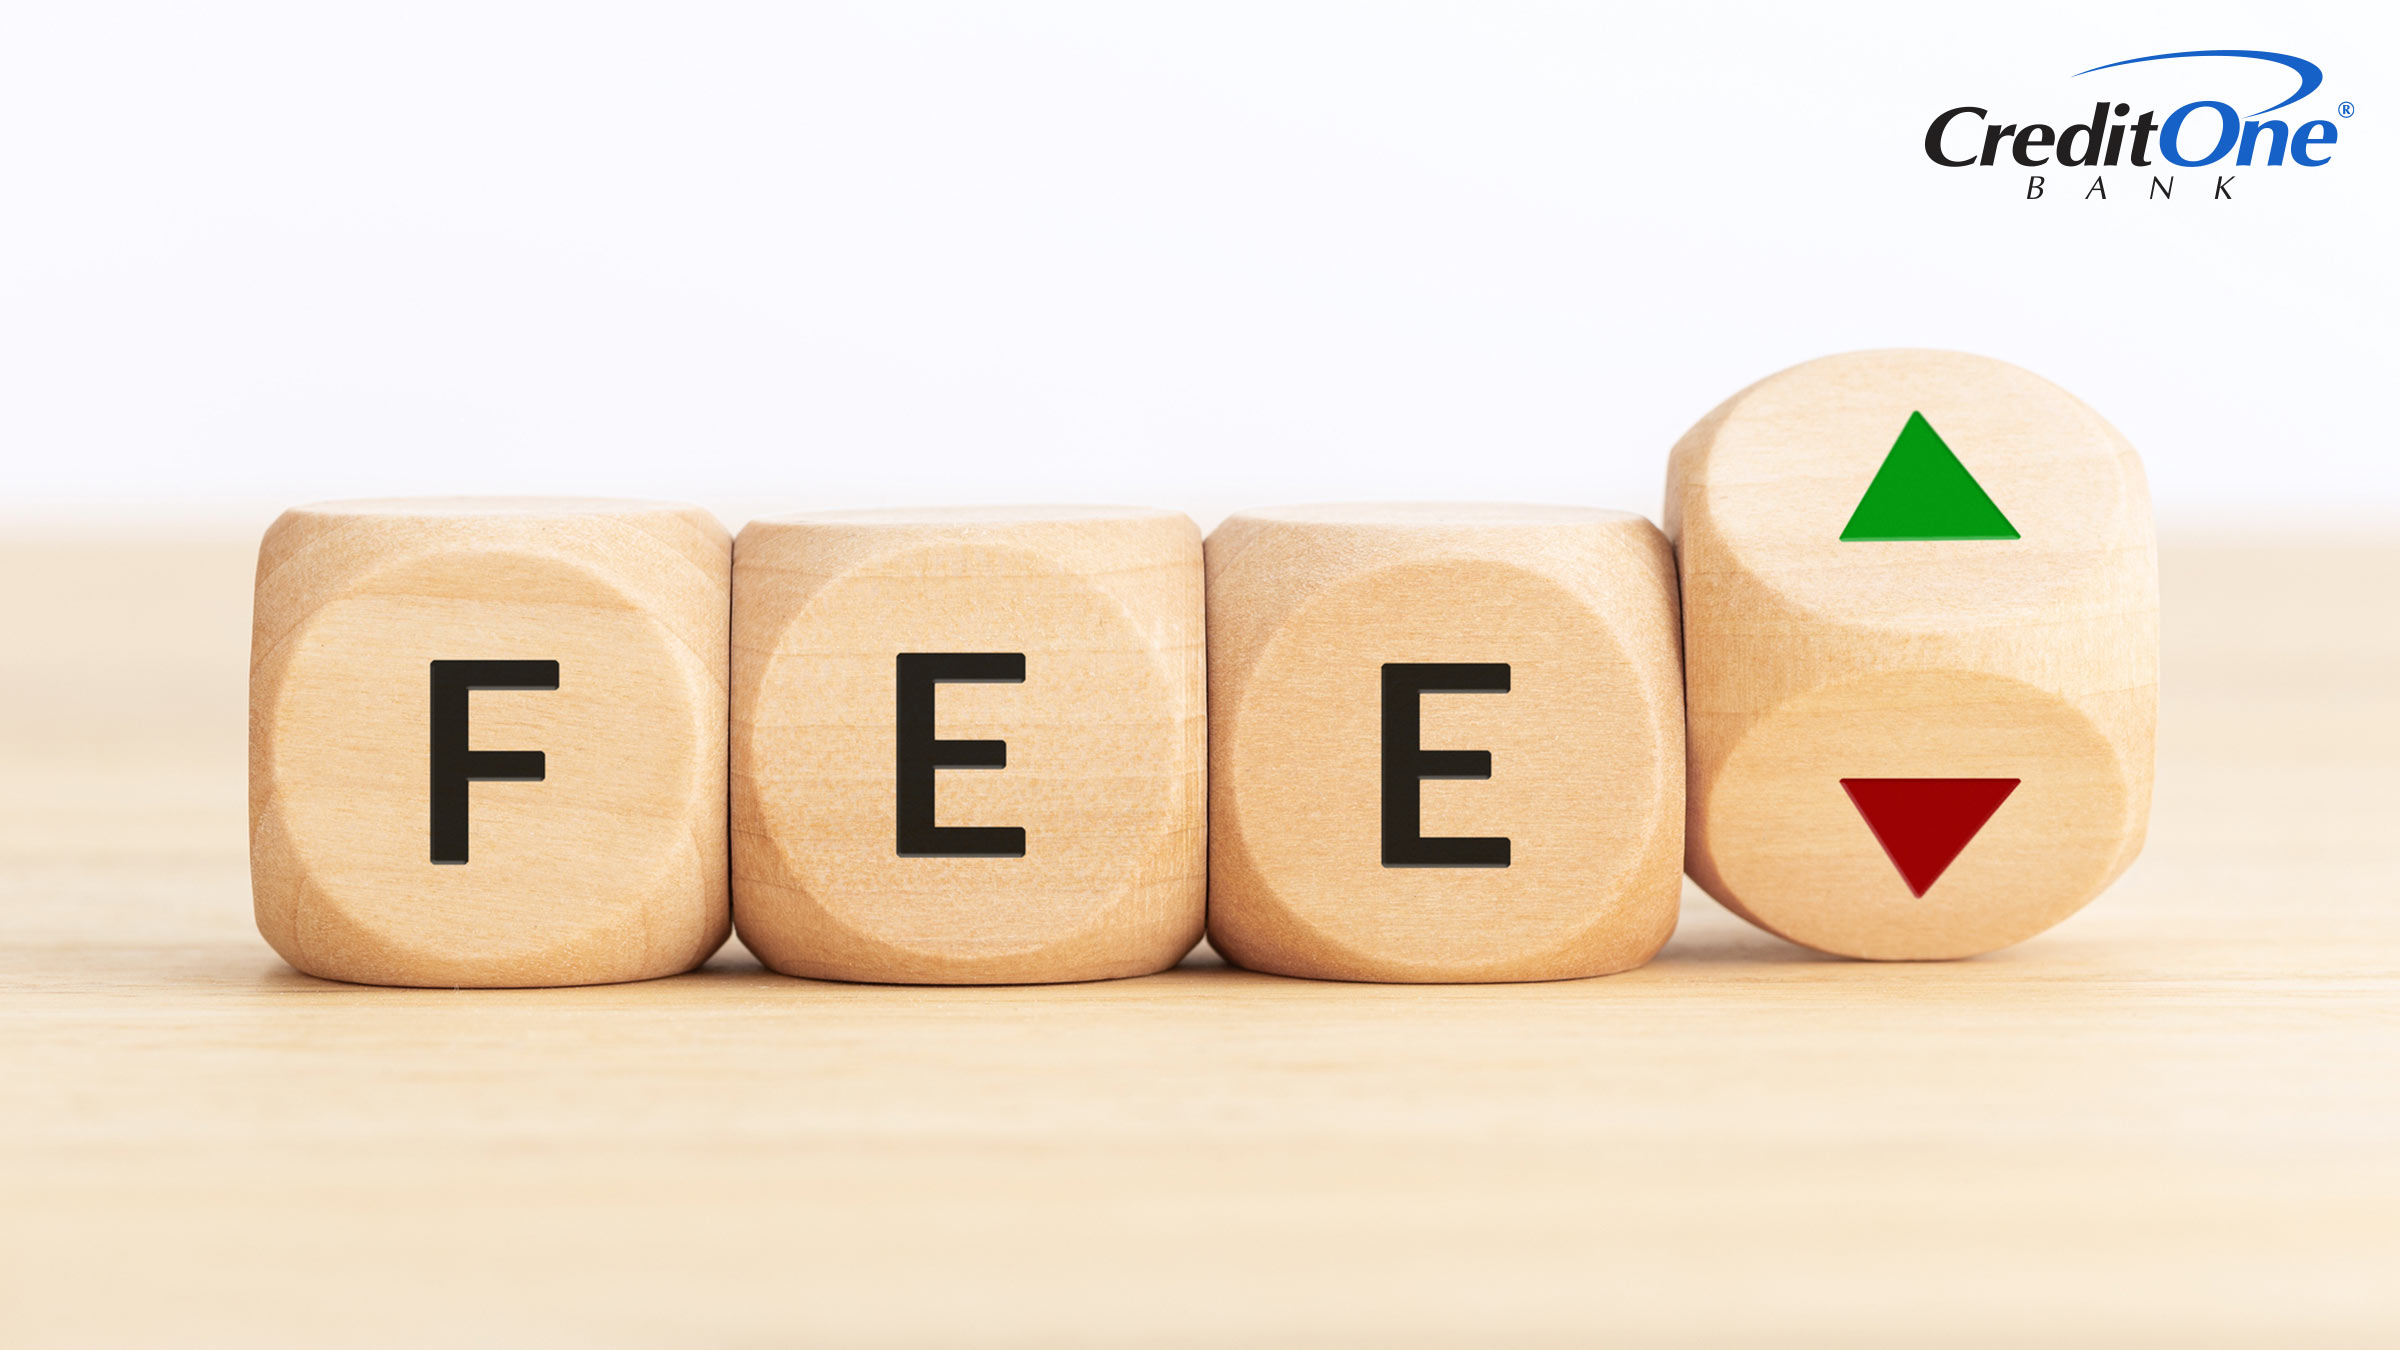 The word “fee” is spelled out on wooden cubes next to a cube with up and down arrows on it, signifying whether credit card annual fees are worth it or not.